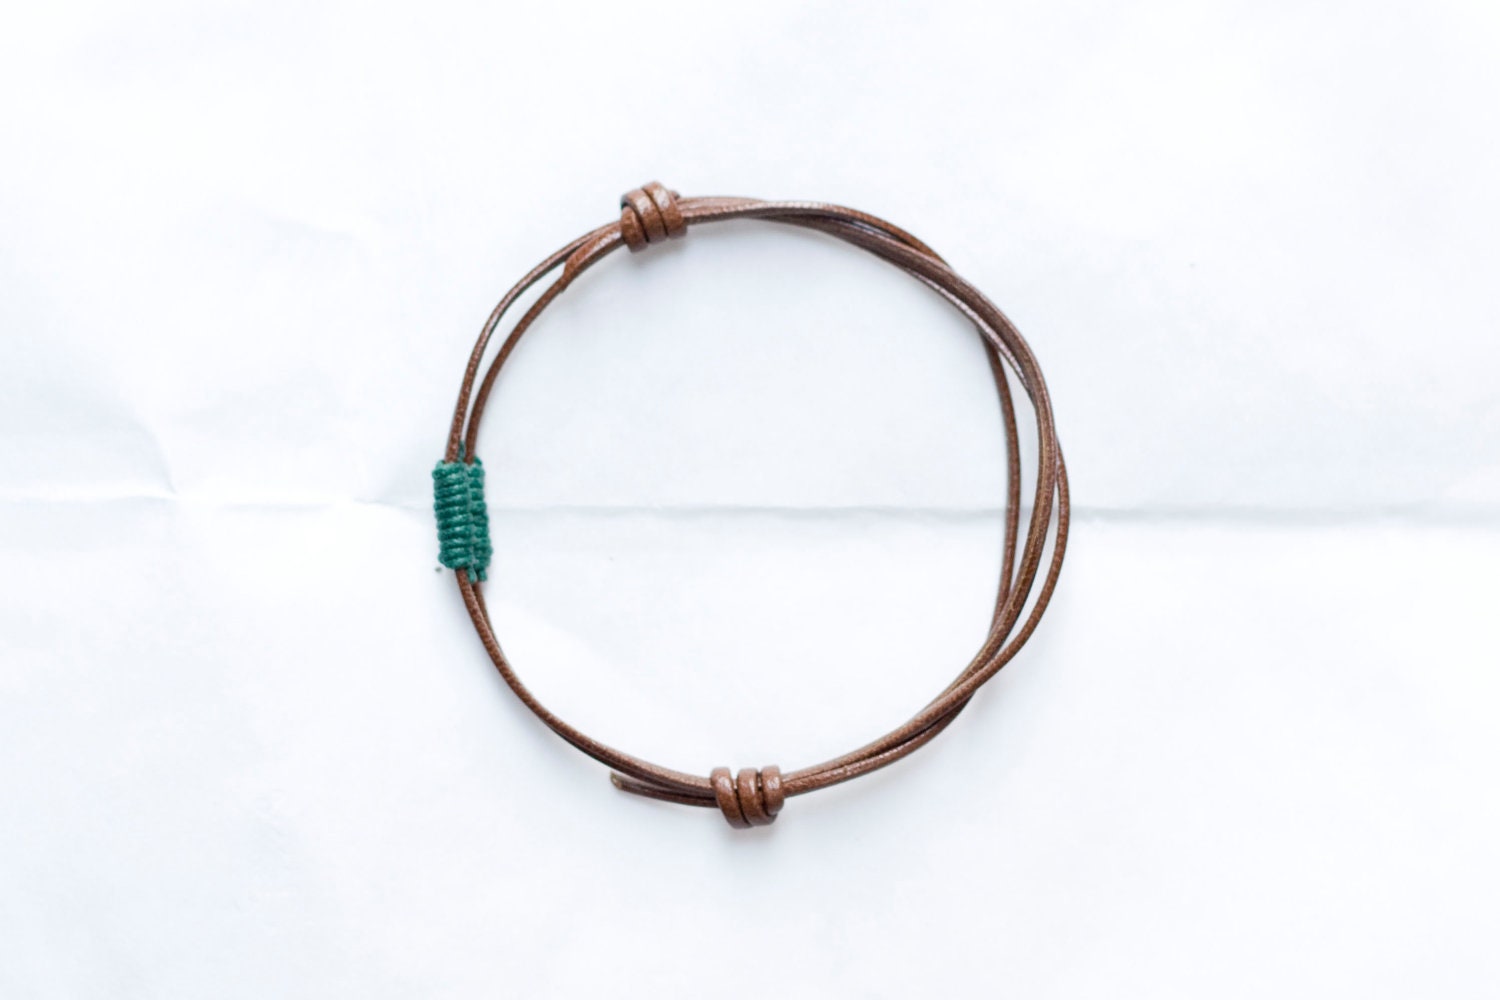 Green waxed cotton cord wrapped brown leather knotted adjustable unisex bracelet - gigeoxy